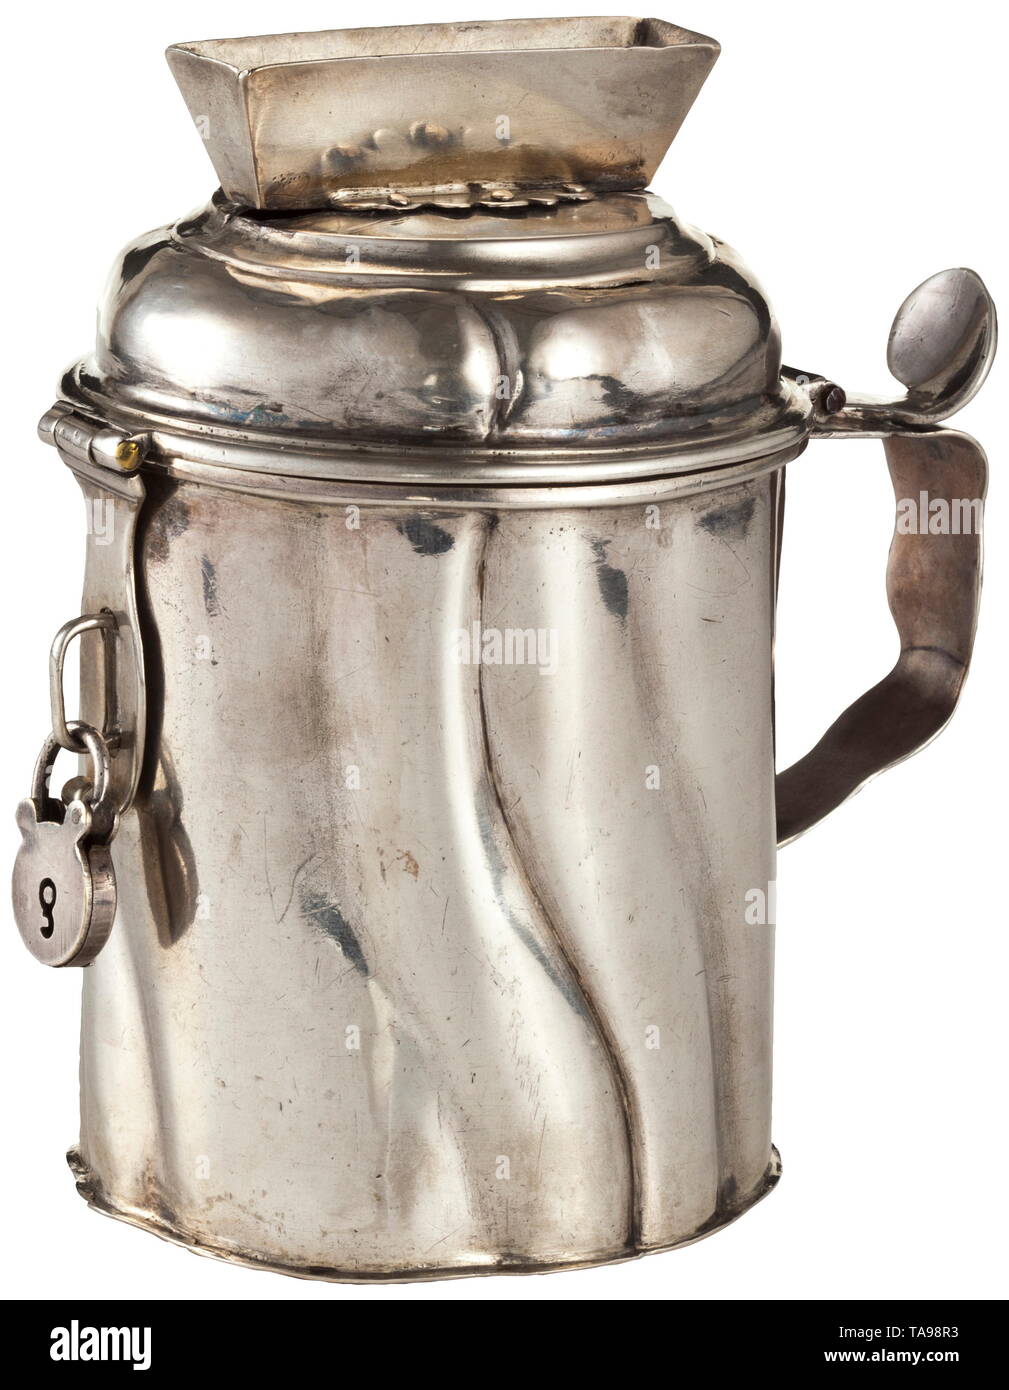 A silver donation box, Dresden, circa 1730 Cylindrical body with gadrooned decoration. Handle with thumb plate, the hinged lid with hasp and attached fake silver padlock. Conical coin slit riveted to the body. On the base assayer's mark beside a Dresden proof mark for twelve-lot silver and master mark 'IGS', probably for Johann Georg Süßt, who began working as a master silversmith in Dresden in 1703. Mis-struck hallmark of the year's letter. Height 13 cm, weight 340 g. historic, historical, handicrafts, handcraft, craft, object, objects, stills, , Additional-Rights-Clearance-Info-Not-Available Stock Photo